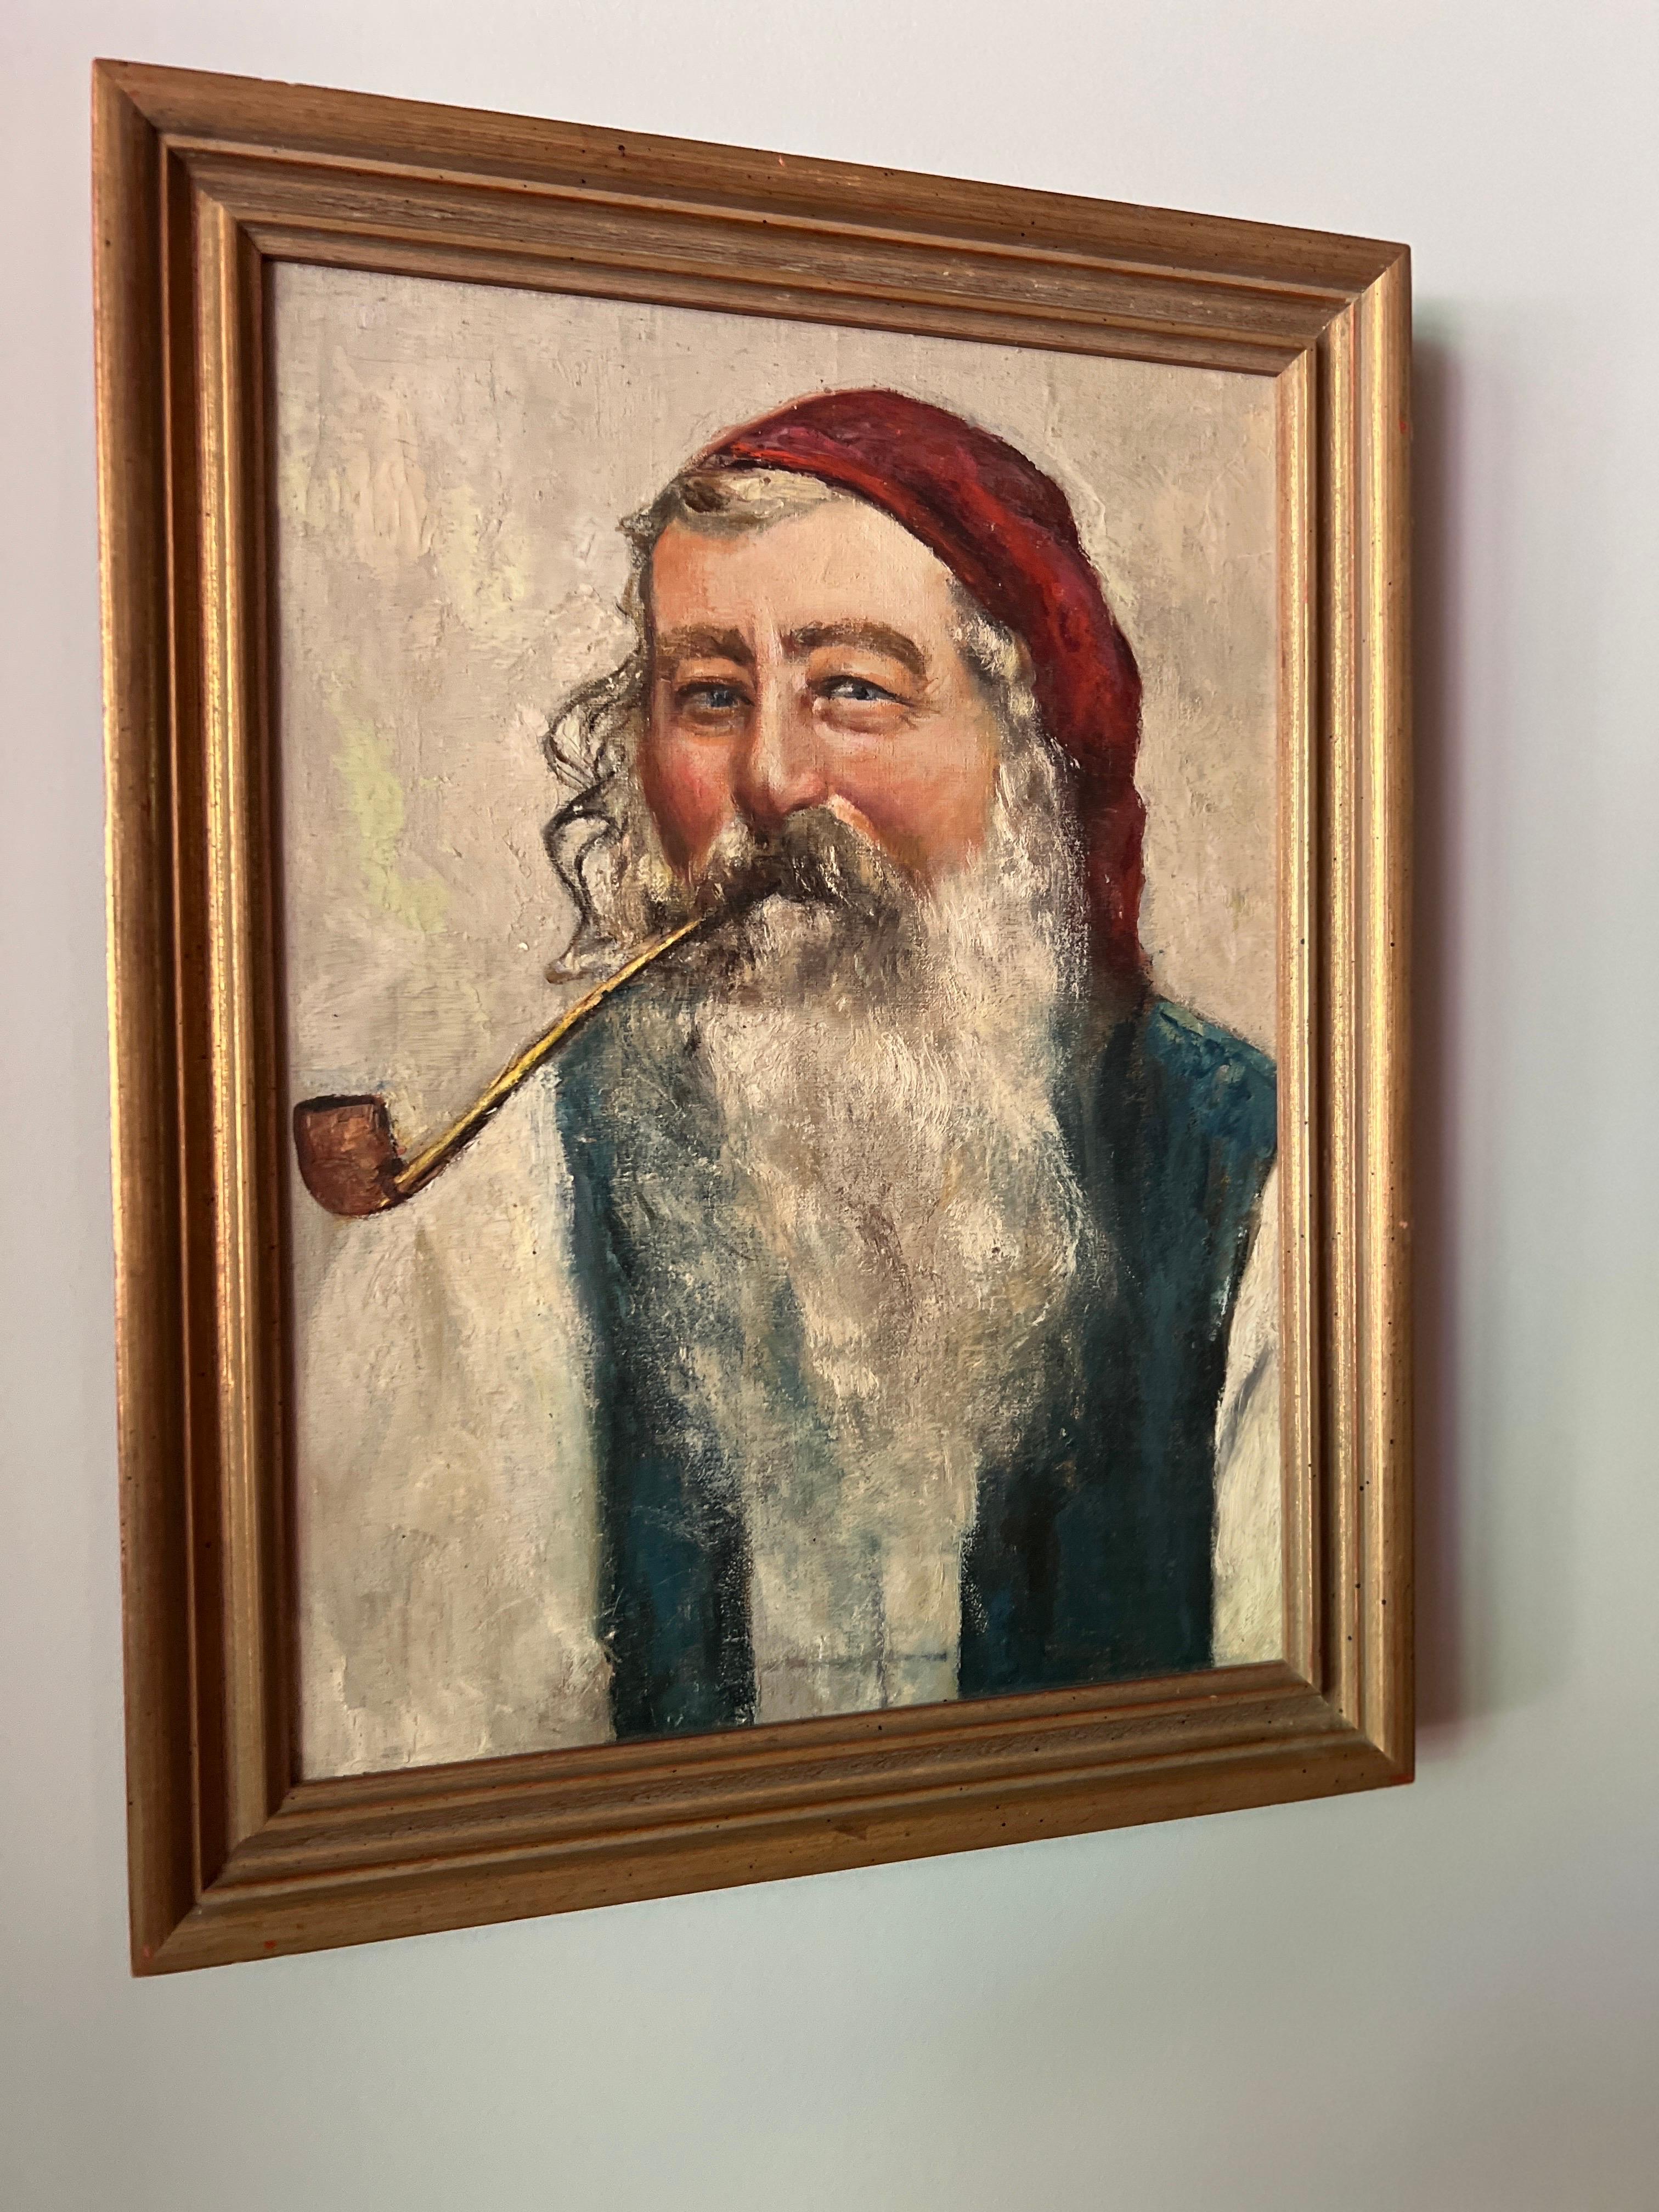 American (Nantucket School), early 20th century.

An antique painting of a sea captain, named Walter by the painter on verso. Dressed with a red hat, blue vest, long beard and smoking a tobacco pipe. Unsigned by artist. 
From a Cape Cod Estate.